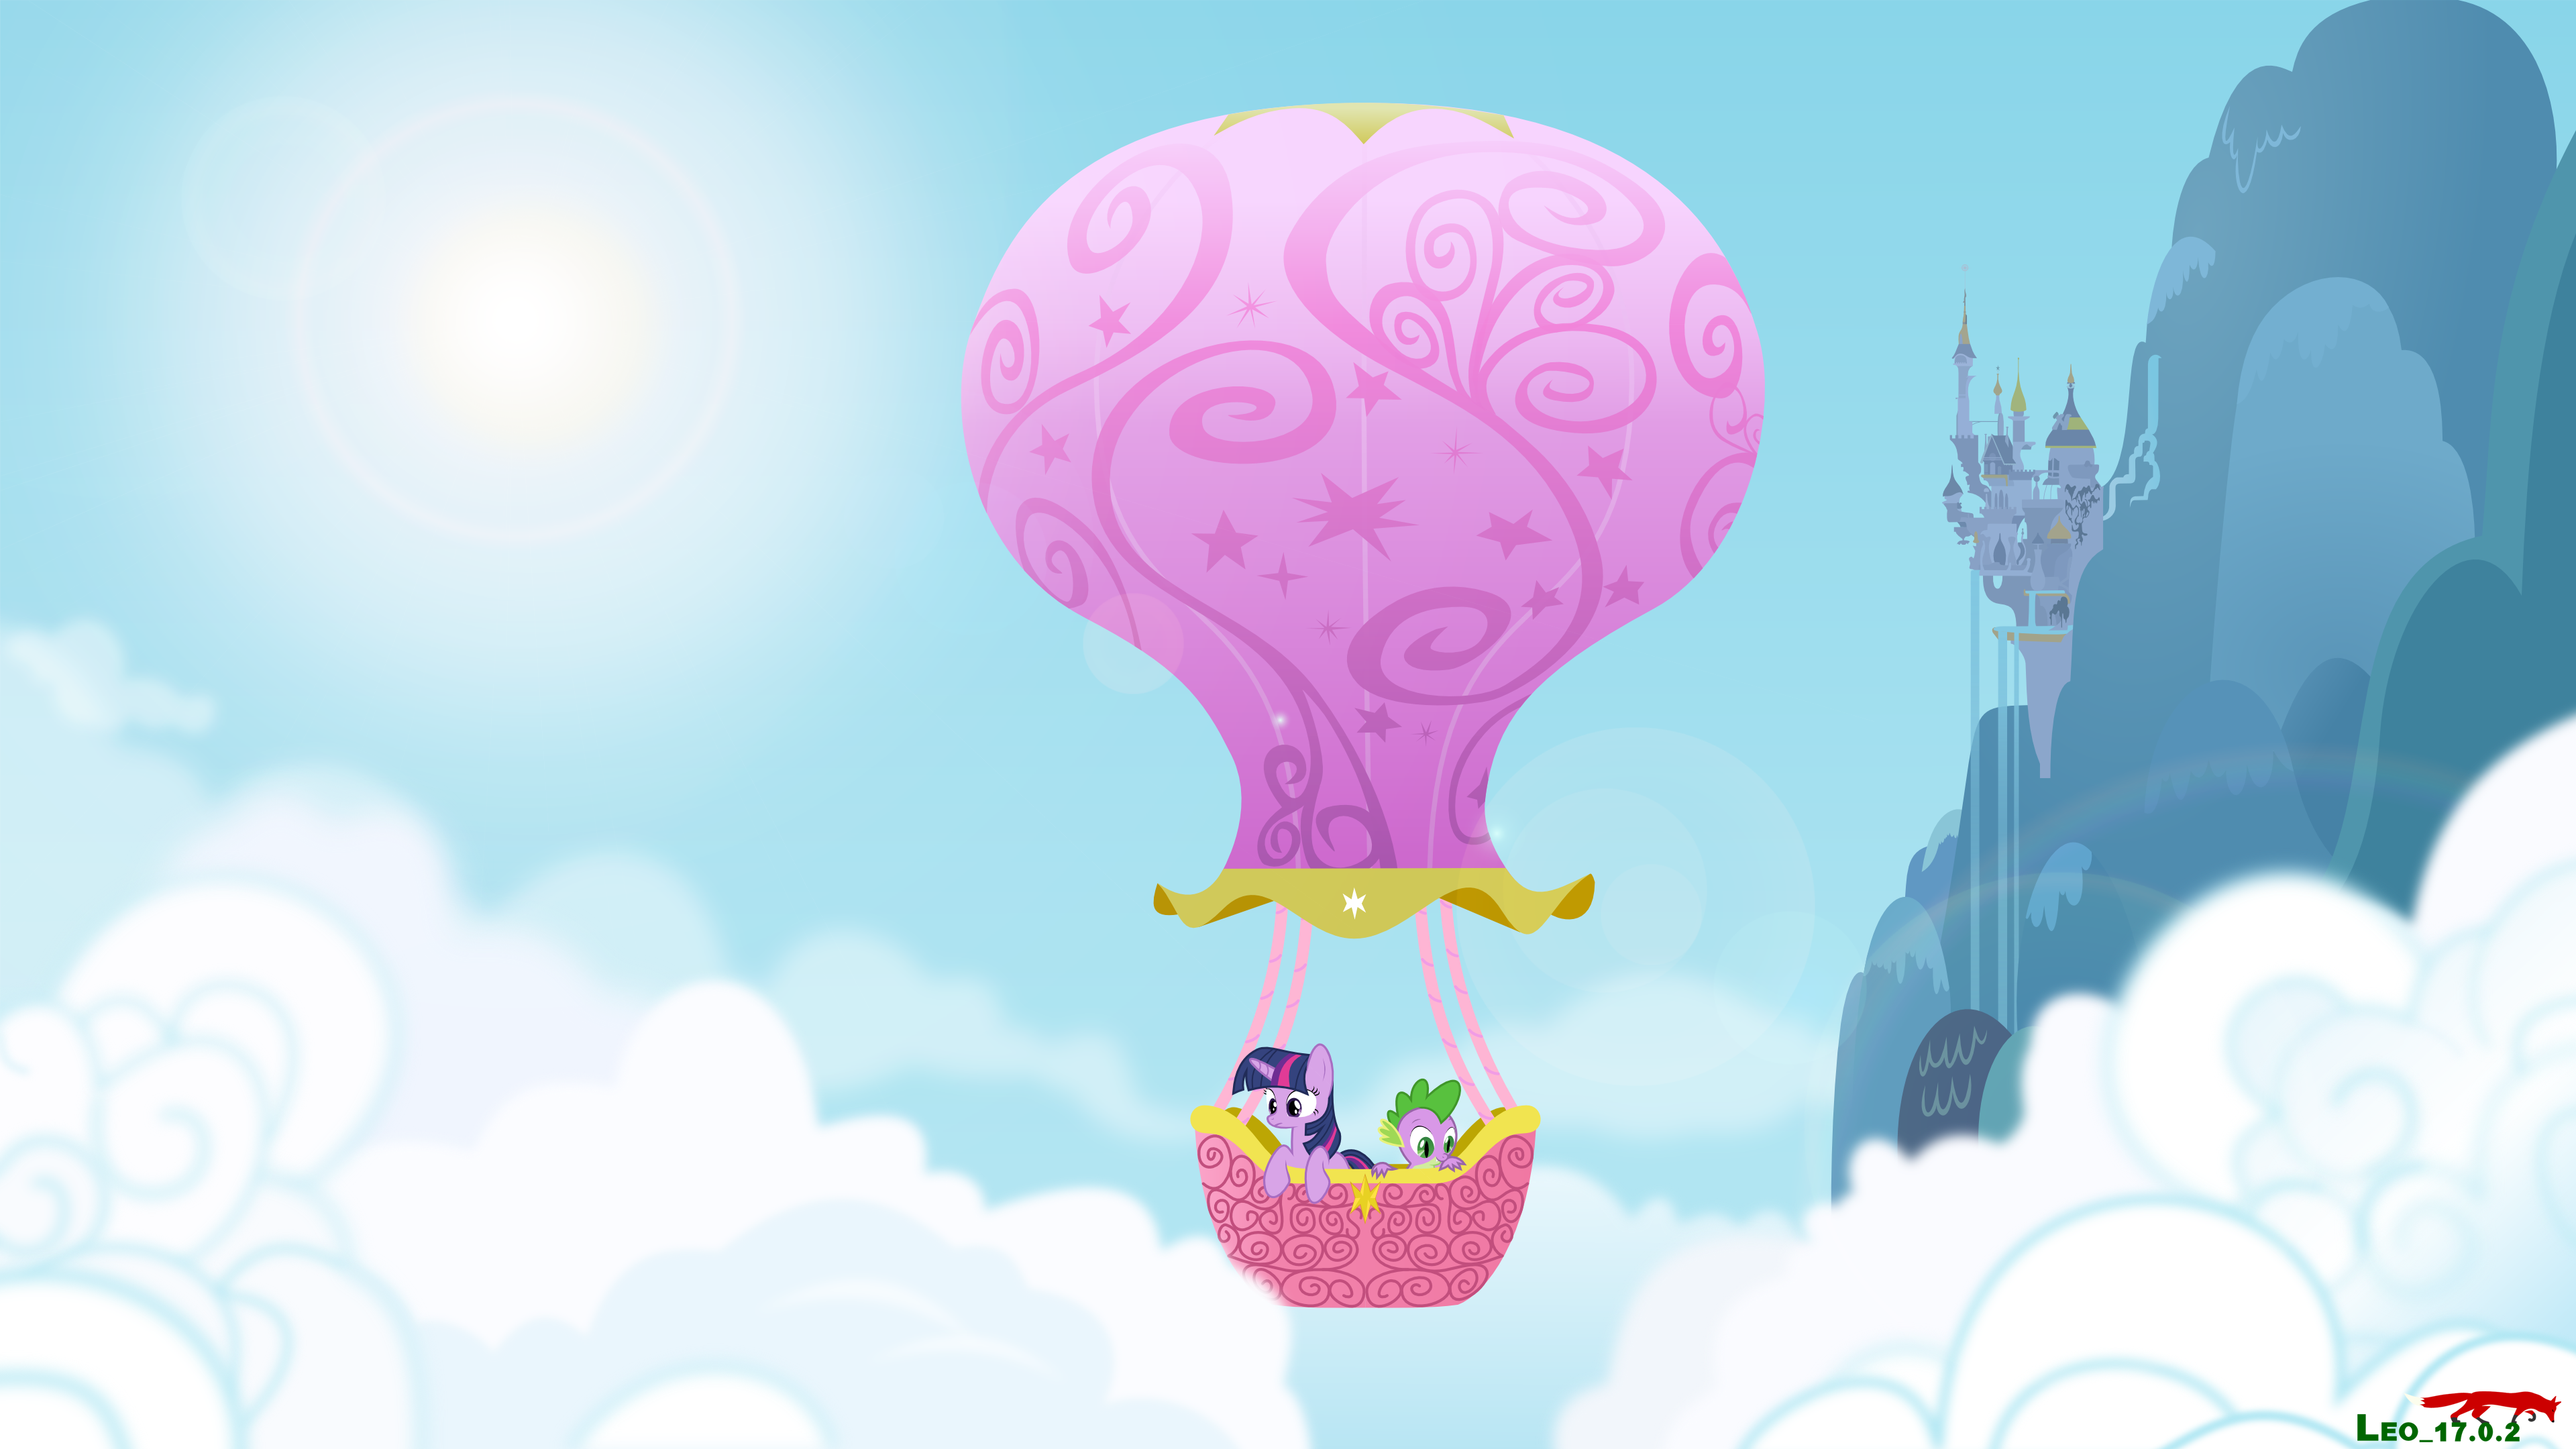 Hot Air Balon of MLP in HD by Leo-17-0-2 and Qsteel